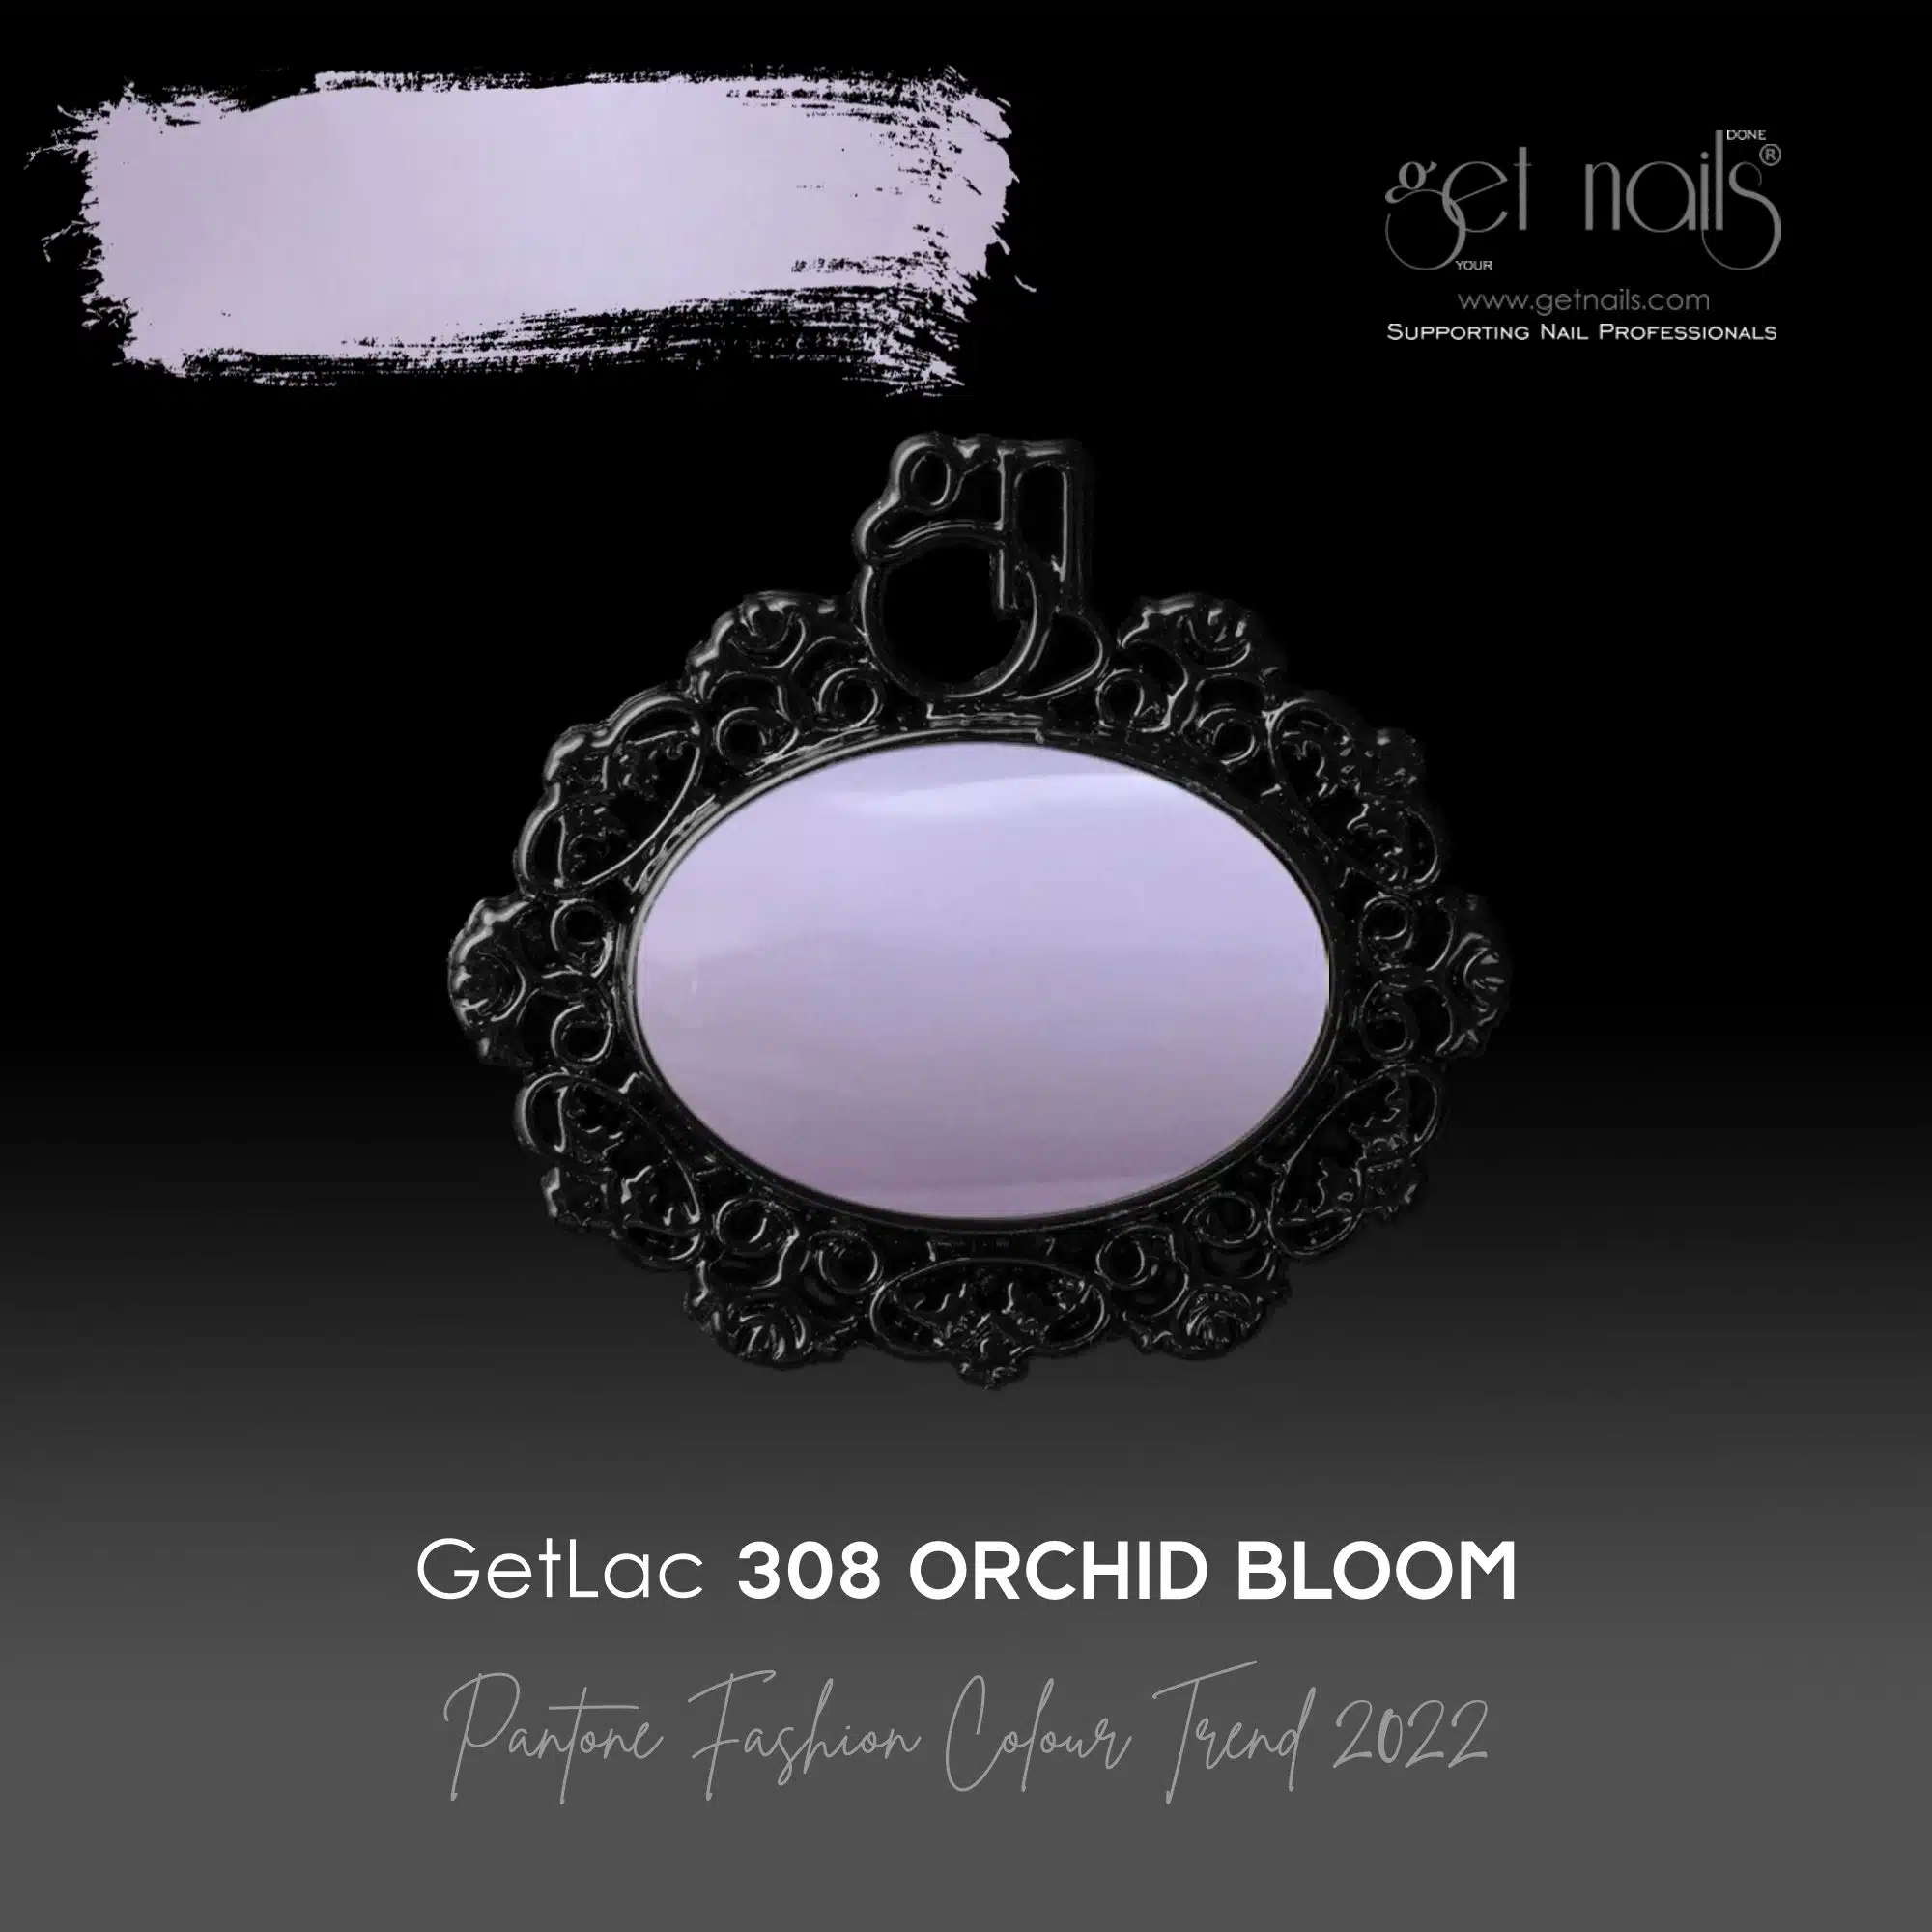 Get Nails Austria - GetLac 308 Orchid Bloom 15 g